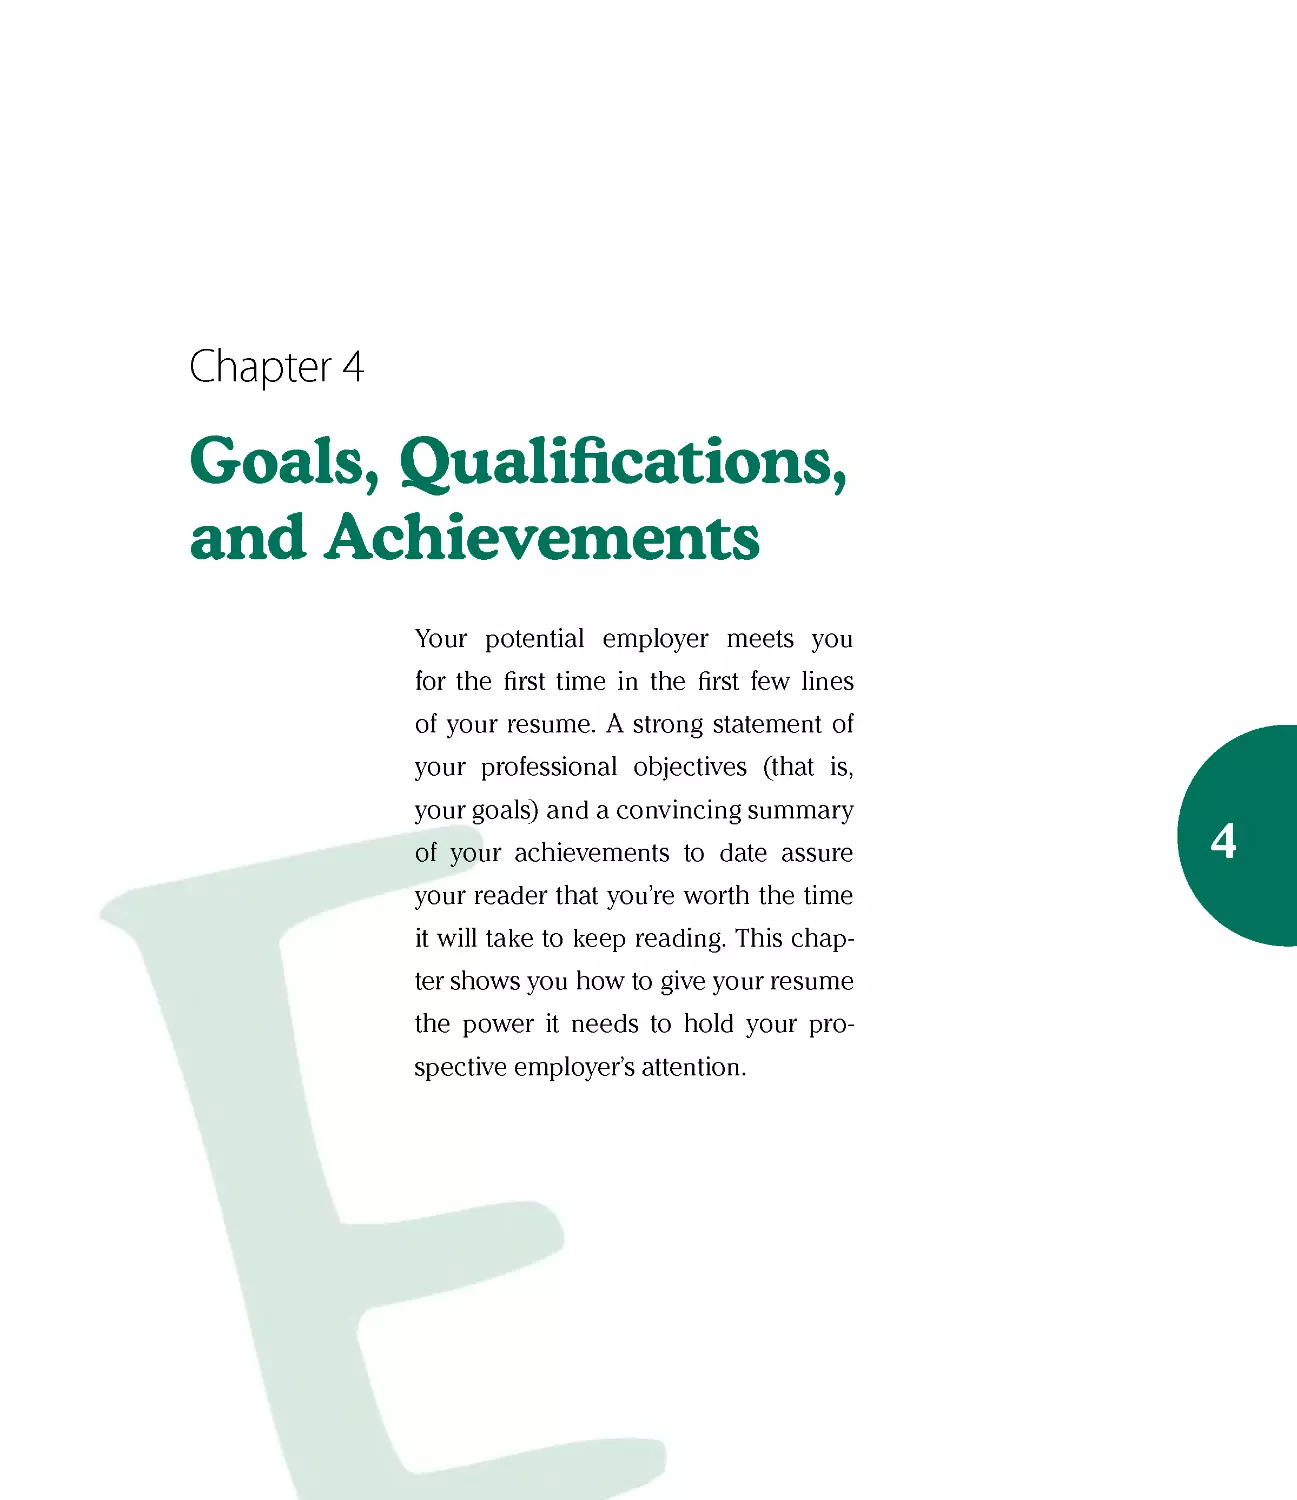 Chapter 4: Goals, Qualifications, and Achievements